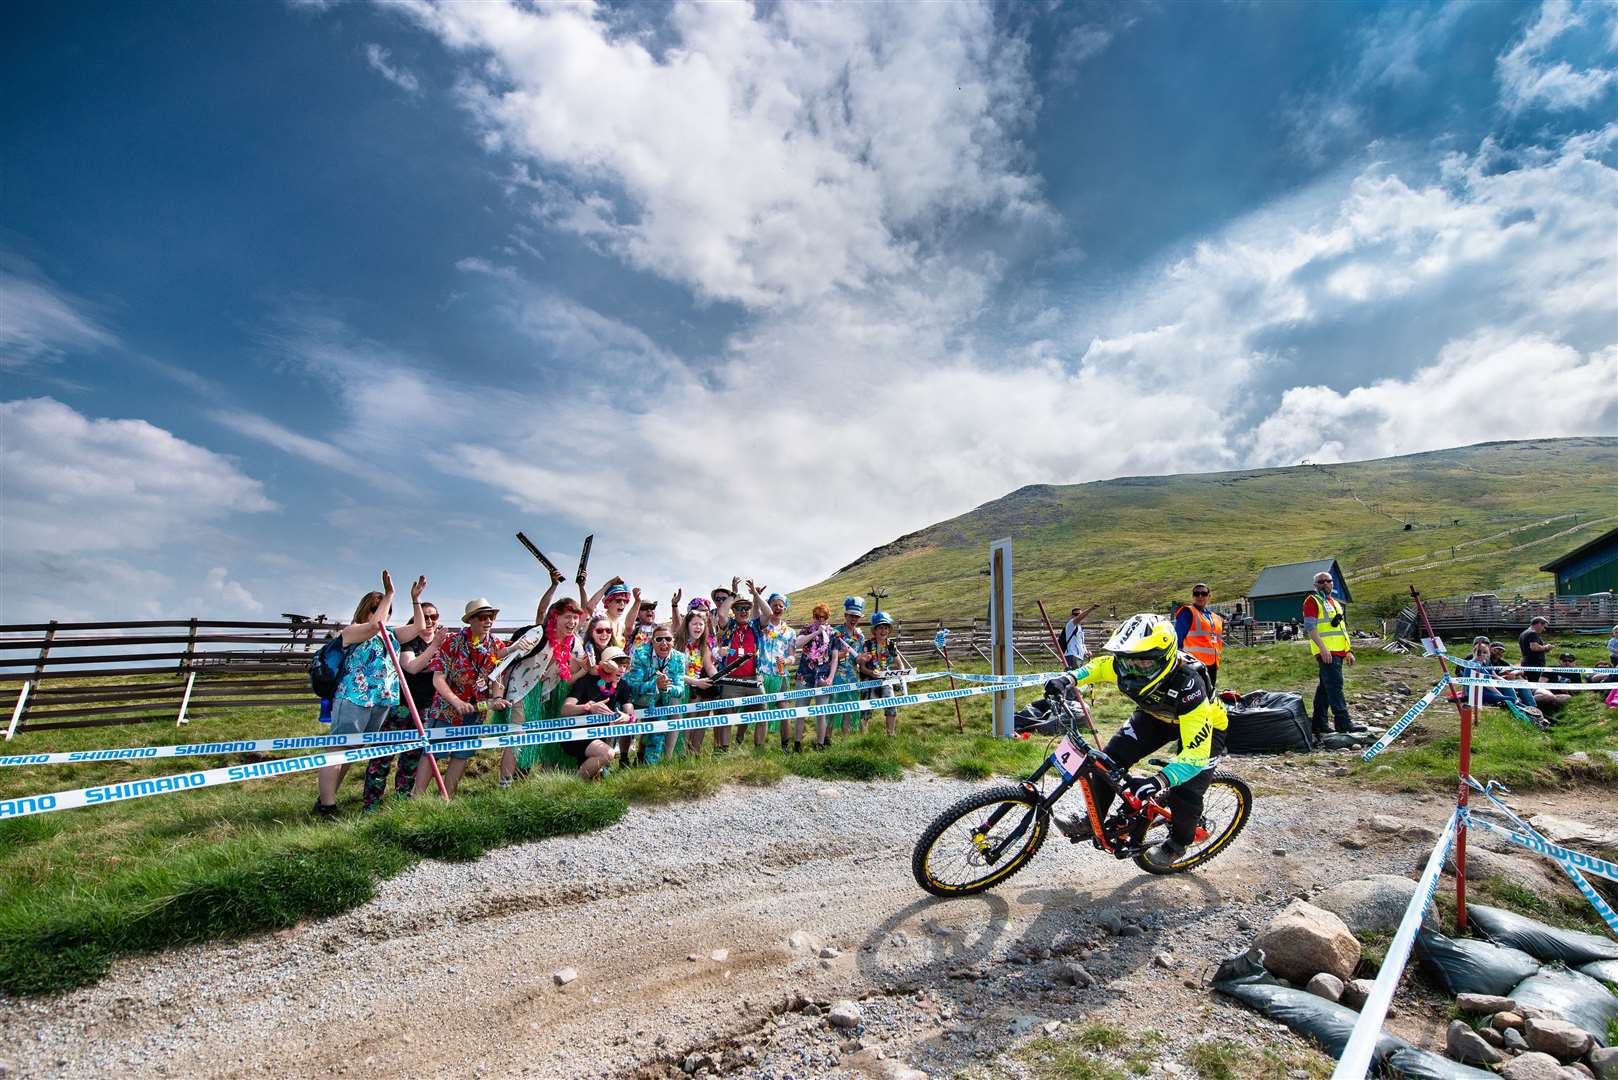 Spectators can get a fabulous view of the action by following the path alongside the course on Aonach Mor.